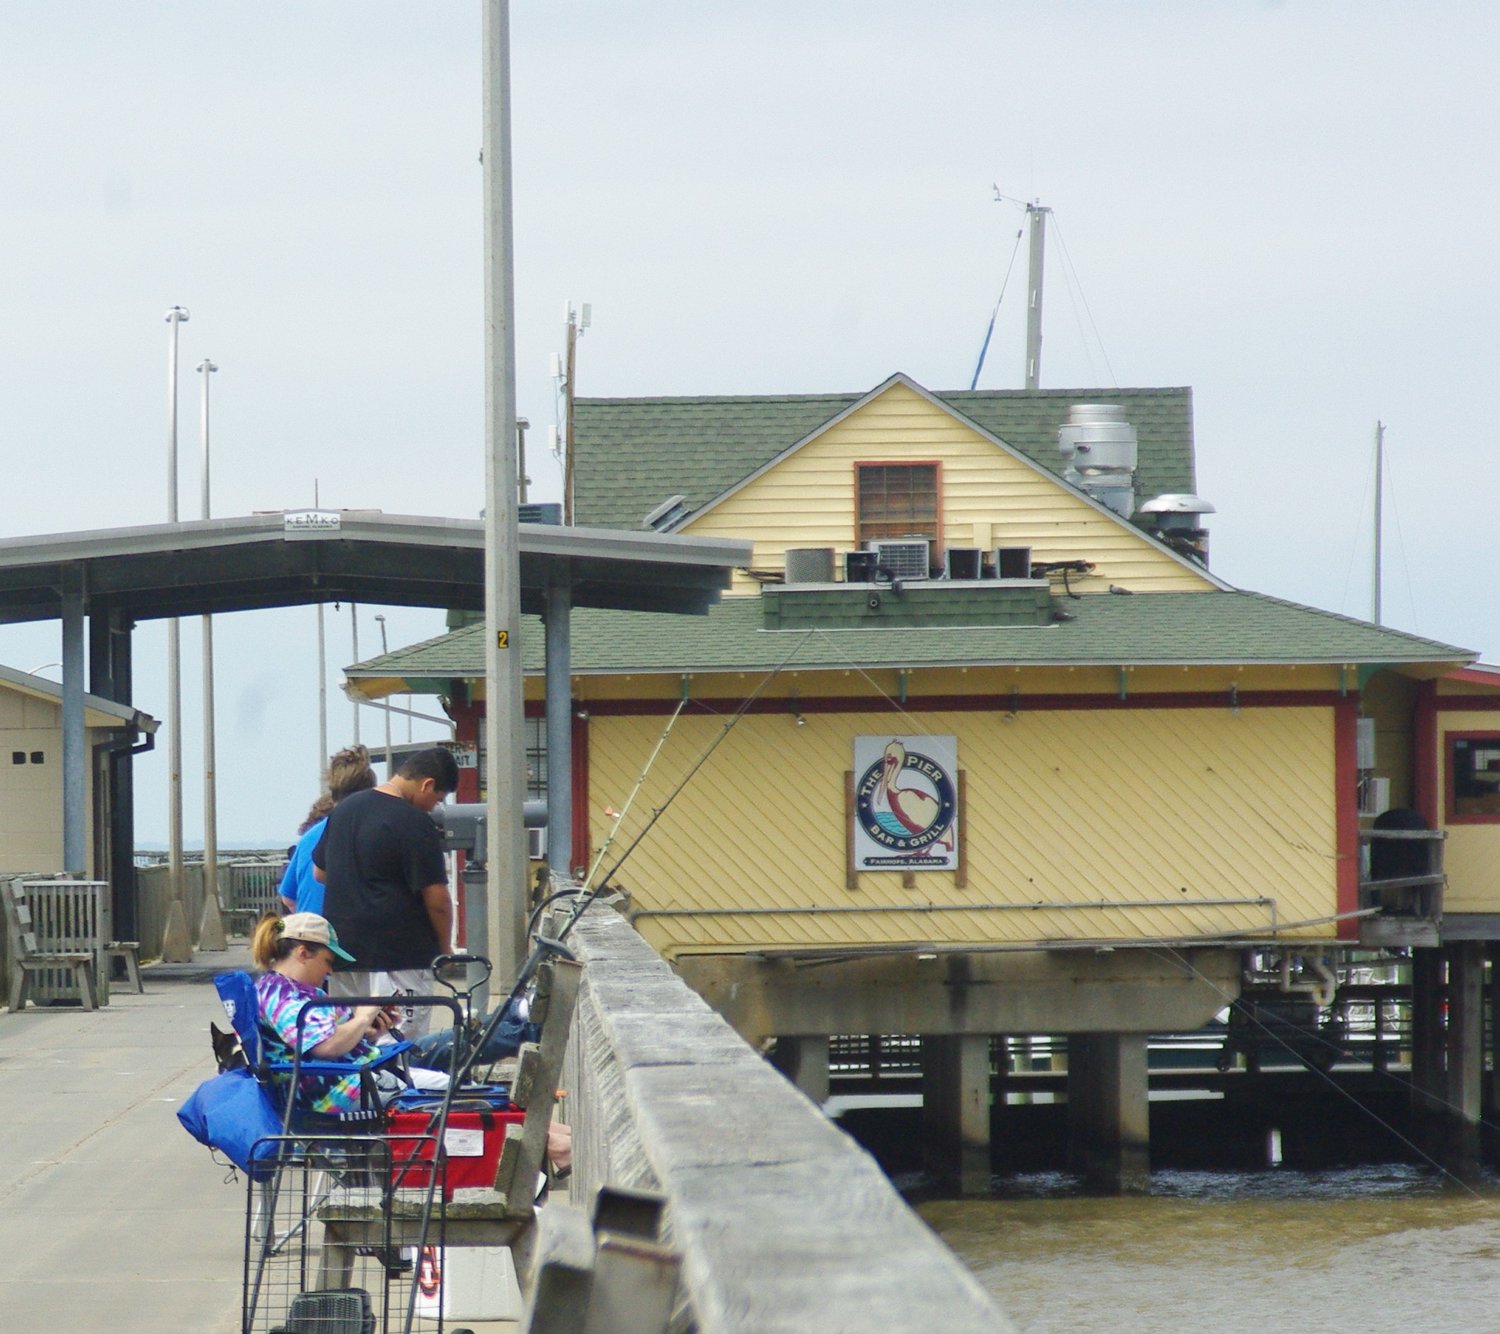 The restaurant on the Fairhope Pier will reopen in 2023 as The Blind Tiger.